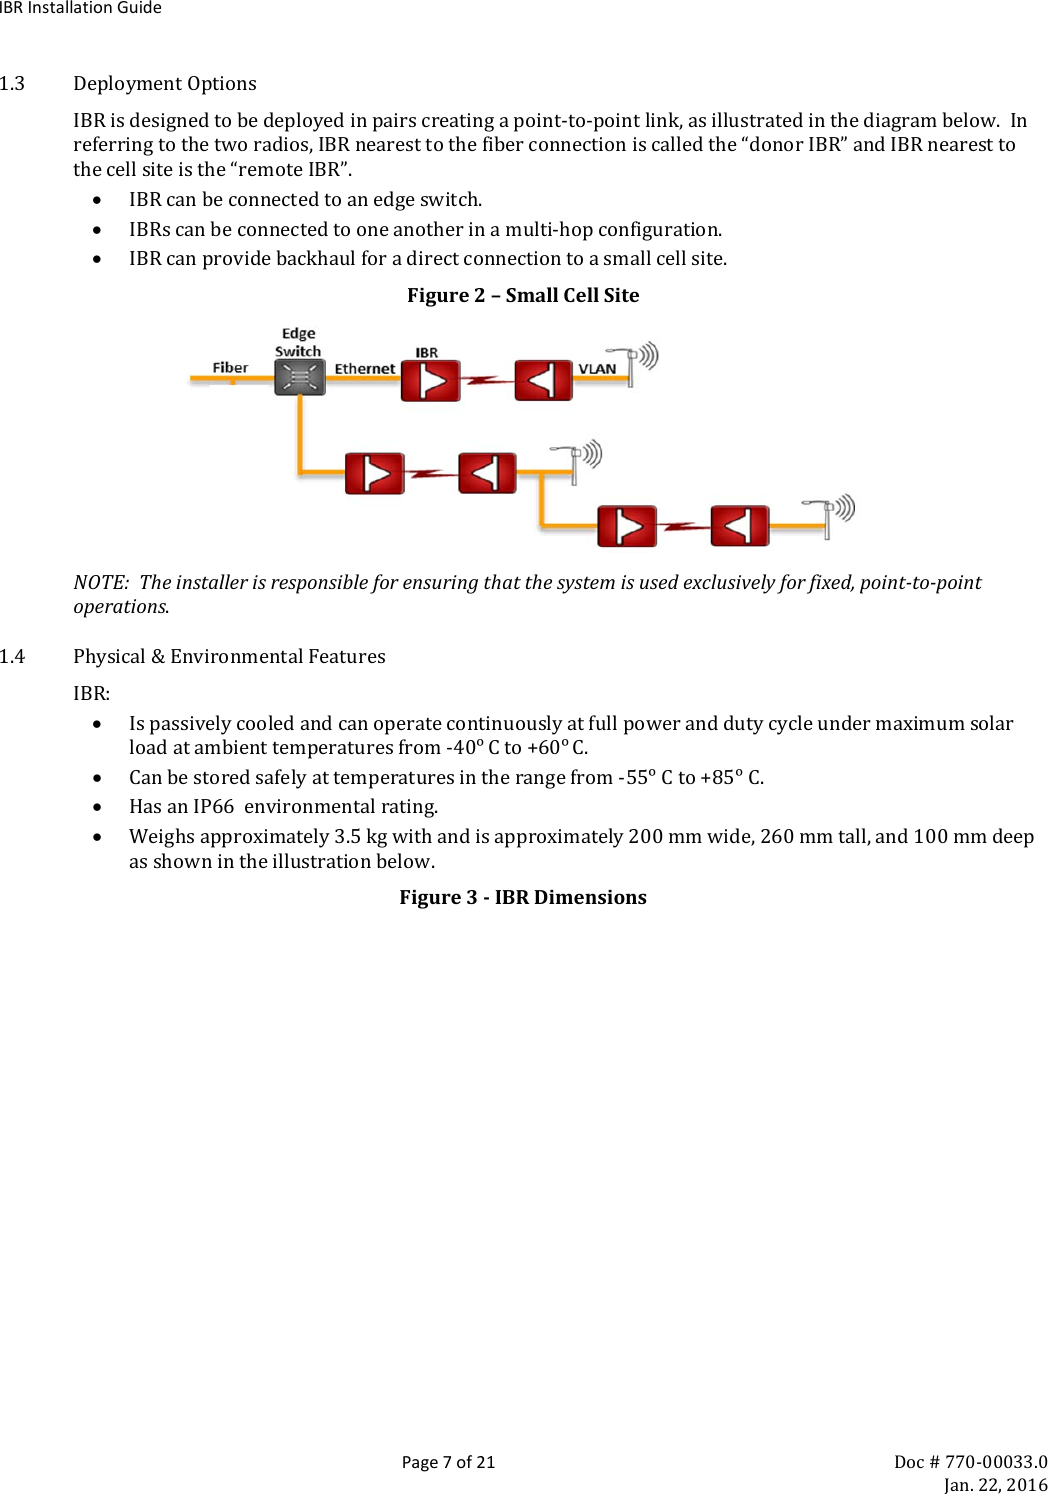 IBR Installation Guide  Page 7 of 21 Doc # 770-00033.0     Jan. 22, 2016 1.3 Deployment Options IBR is designed to be deployed in pairs creating a point-to-point link, as illustrated in the diagram below.  In referring to the two radios, IBR nearest to the fiber connection is called the “donor IBR” and IBR nearest to the cell site is the “remote IBR”. • IBR can be connected to an edge switch. • IBRs can be connected to one another in a multi-hop configuration. • IBR can provide backhaul for a direct connection to a small cell site. Figure 2 – Small Cell Site                 NOTE:  The installer is responsible for ensuring that the system is used exclusively for fixed, point-to-point operations.        1.4 Physical &amp; Environmental Features IBR: • Is passively cooled and can operate continuously at full power and duty cycle under maximum solar load at ambient temperatures from -40ᵒ C to +60ᵒ C. • Can be stored safely at temperatures in the range from -55ᵒ C to +85ᵒ C. • Has an IP66  environmental rating. • Weighs approximately 3.5 kg with and is approximately 200 mm wide, 260 mm tall, and 100 mm deep as shown in the illustration below. Figure 3 - IBR Dimensions 